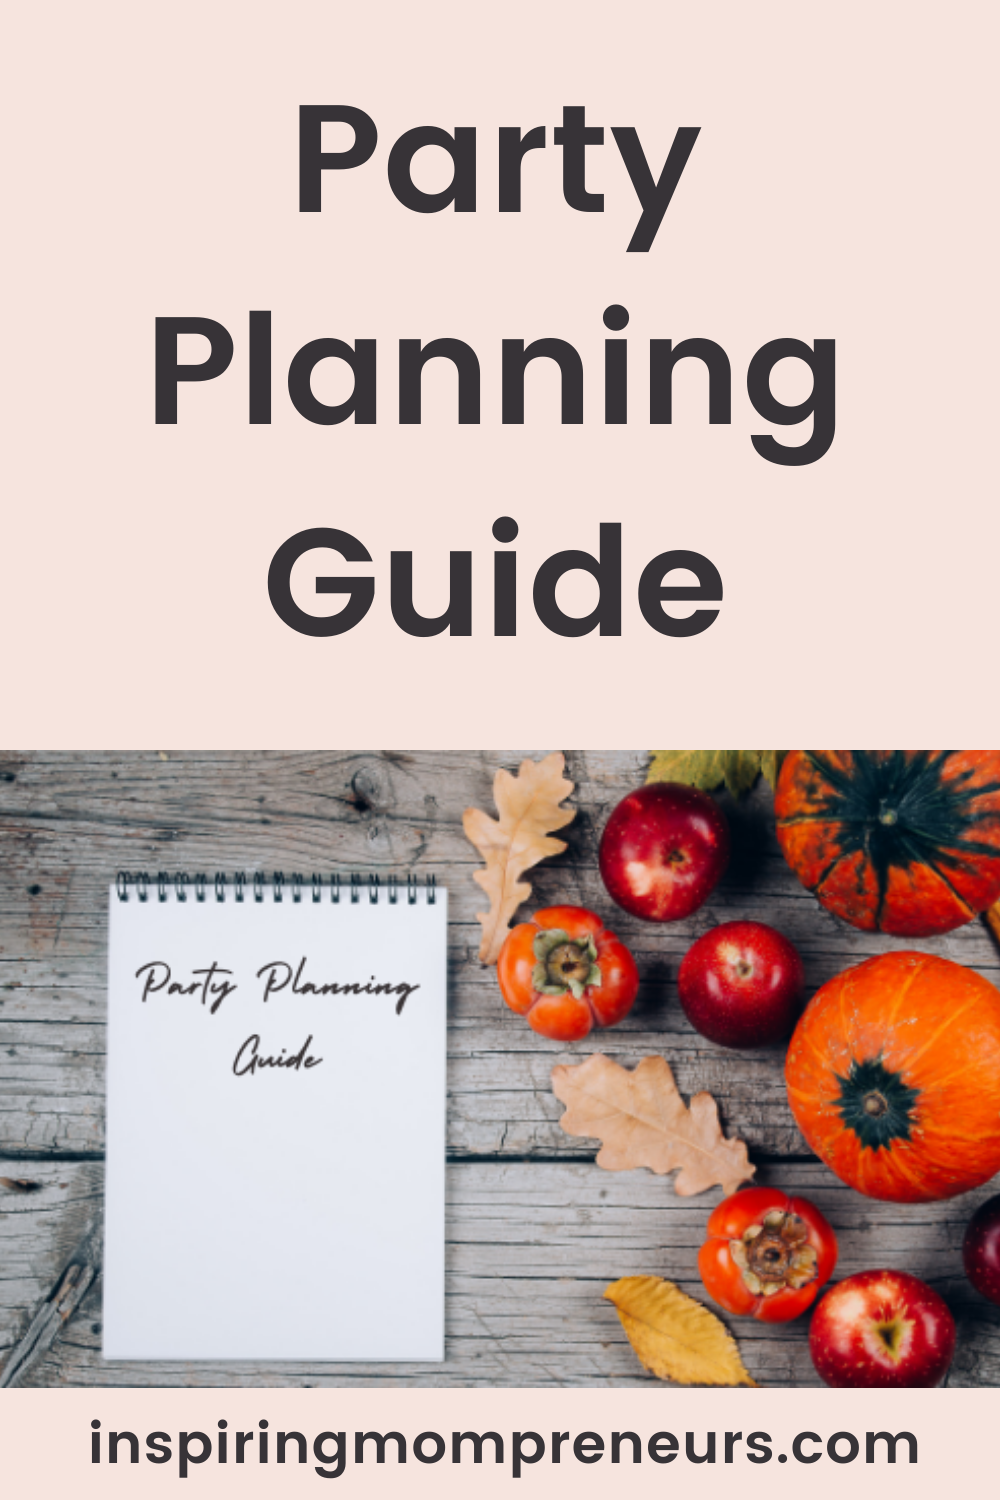 Planning a last-minute party at home? Follow the 6 steps in this handy party planning guide and you'll glide through your party preparations with ease.